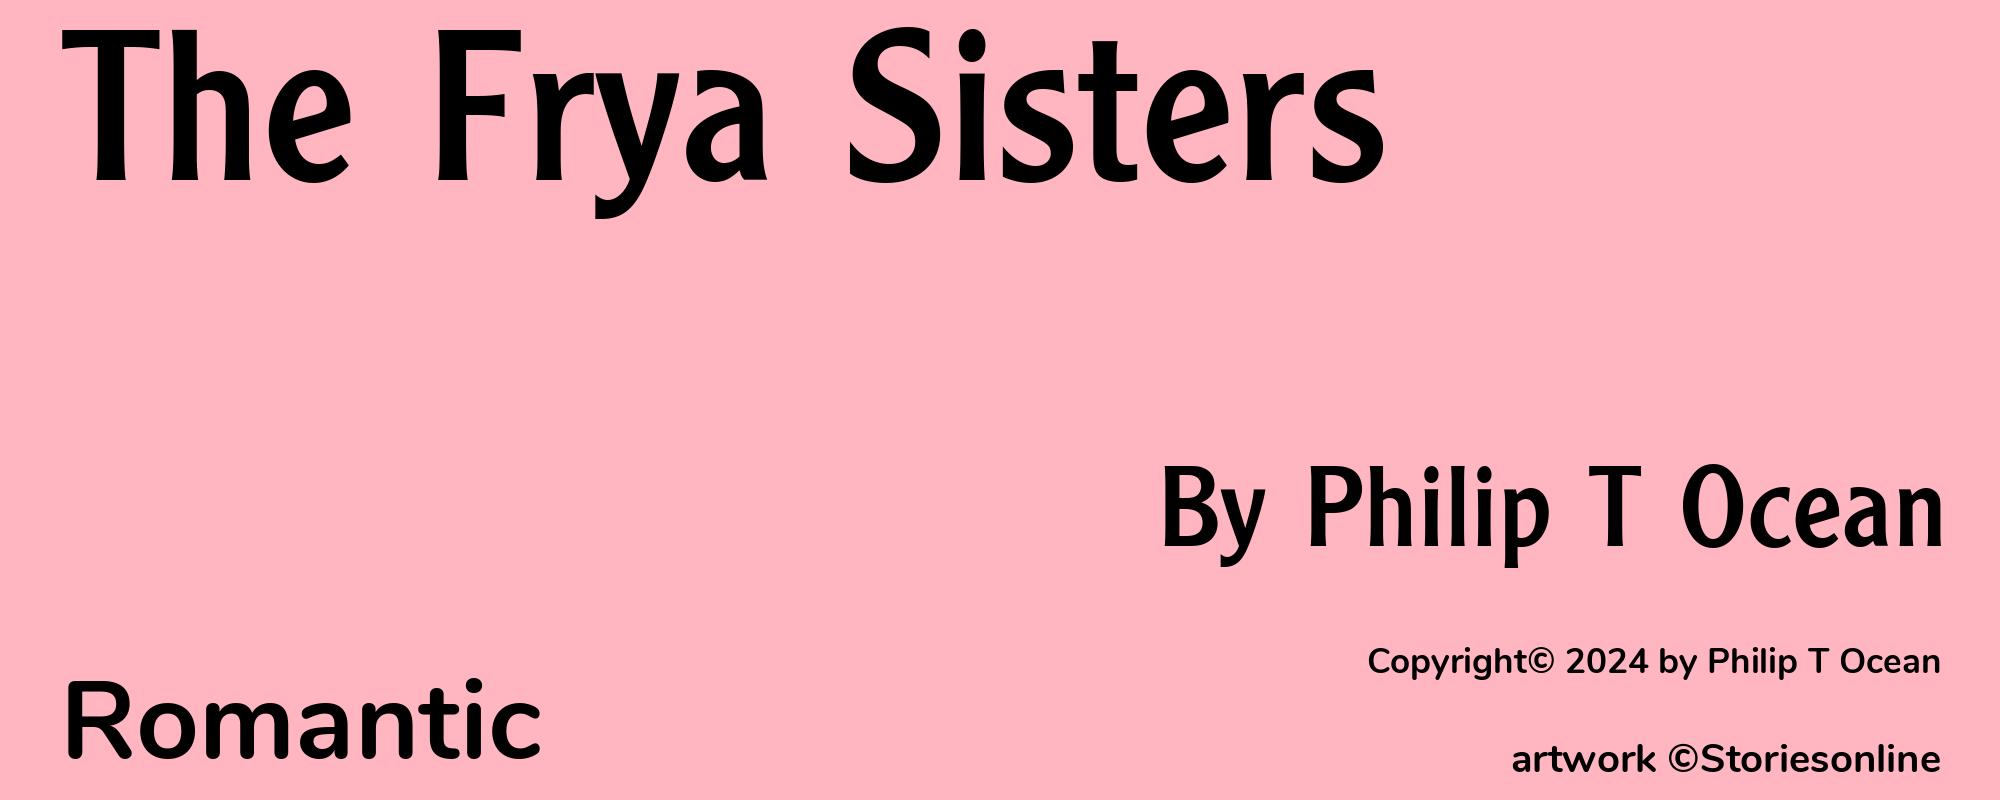 The Frya Sisters - Cover